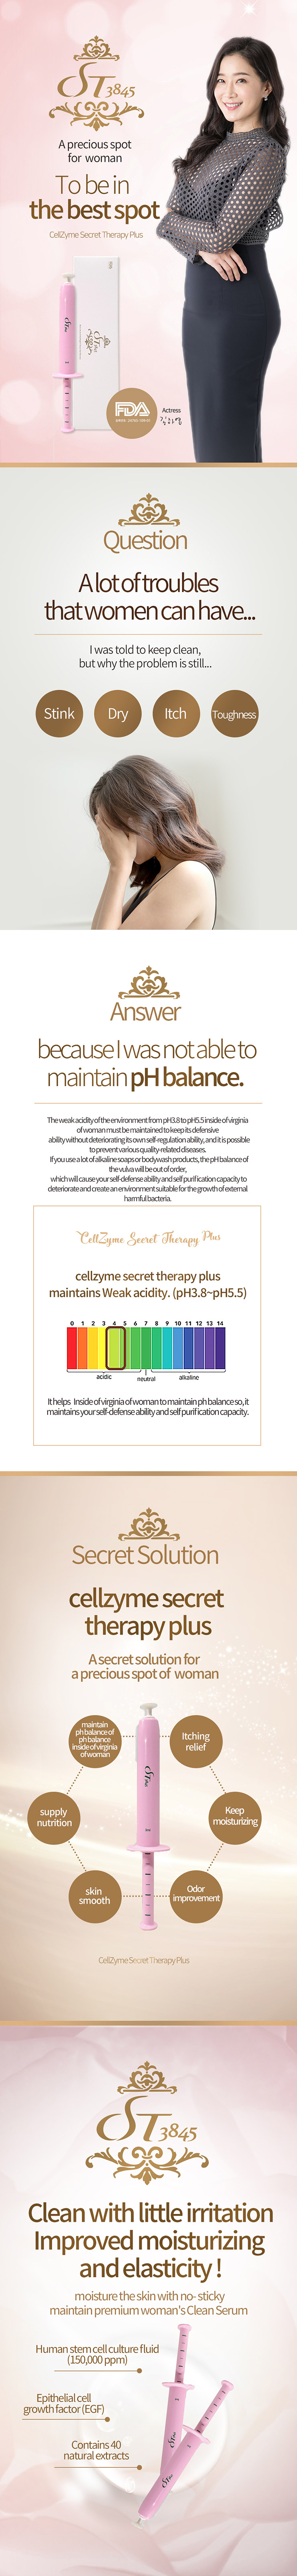 cellzyme secret therapy